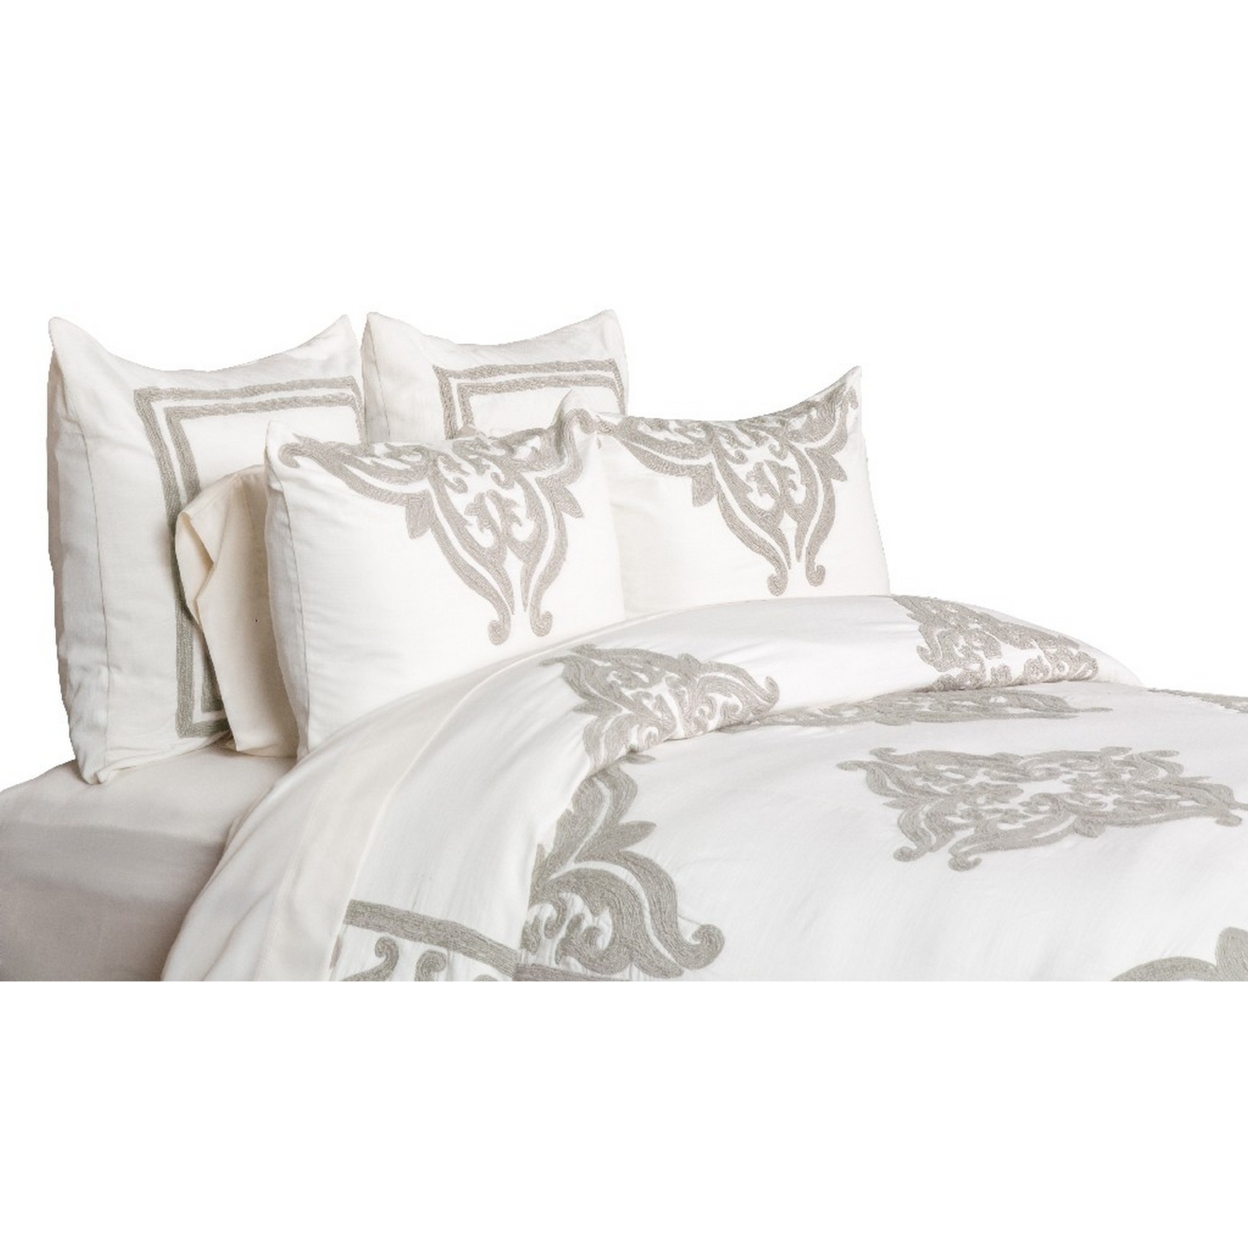 Lenz Queen Size Cotton Duvet Cover With Hand Stitched Damask Embroidery, Ivory- Saltoro Sherpi